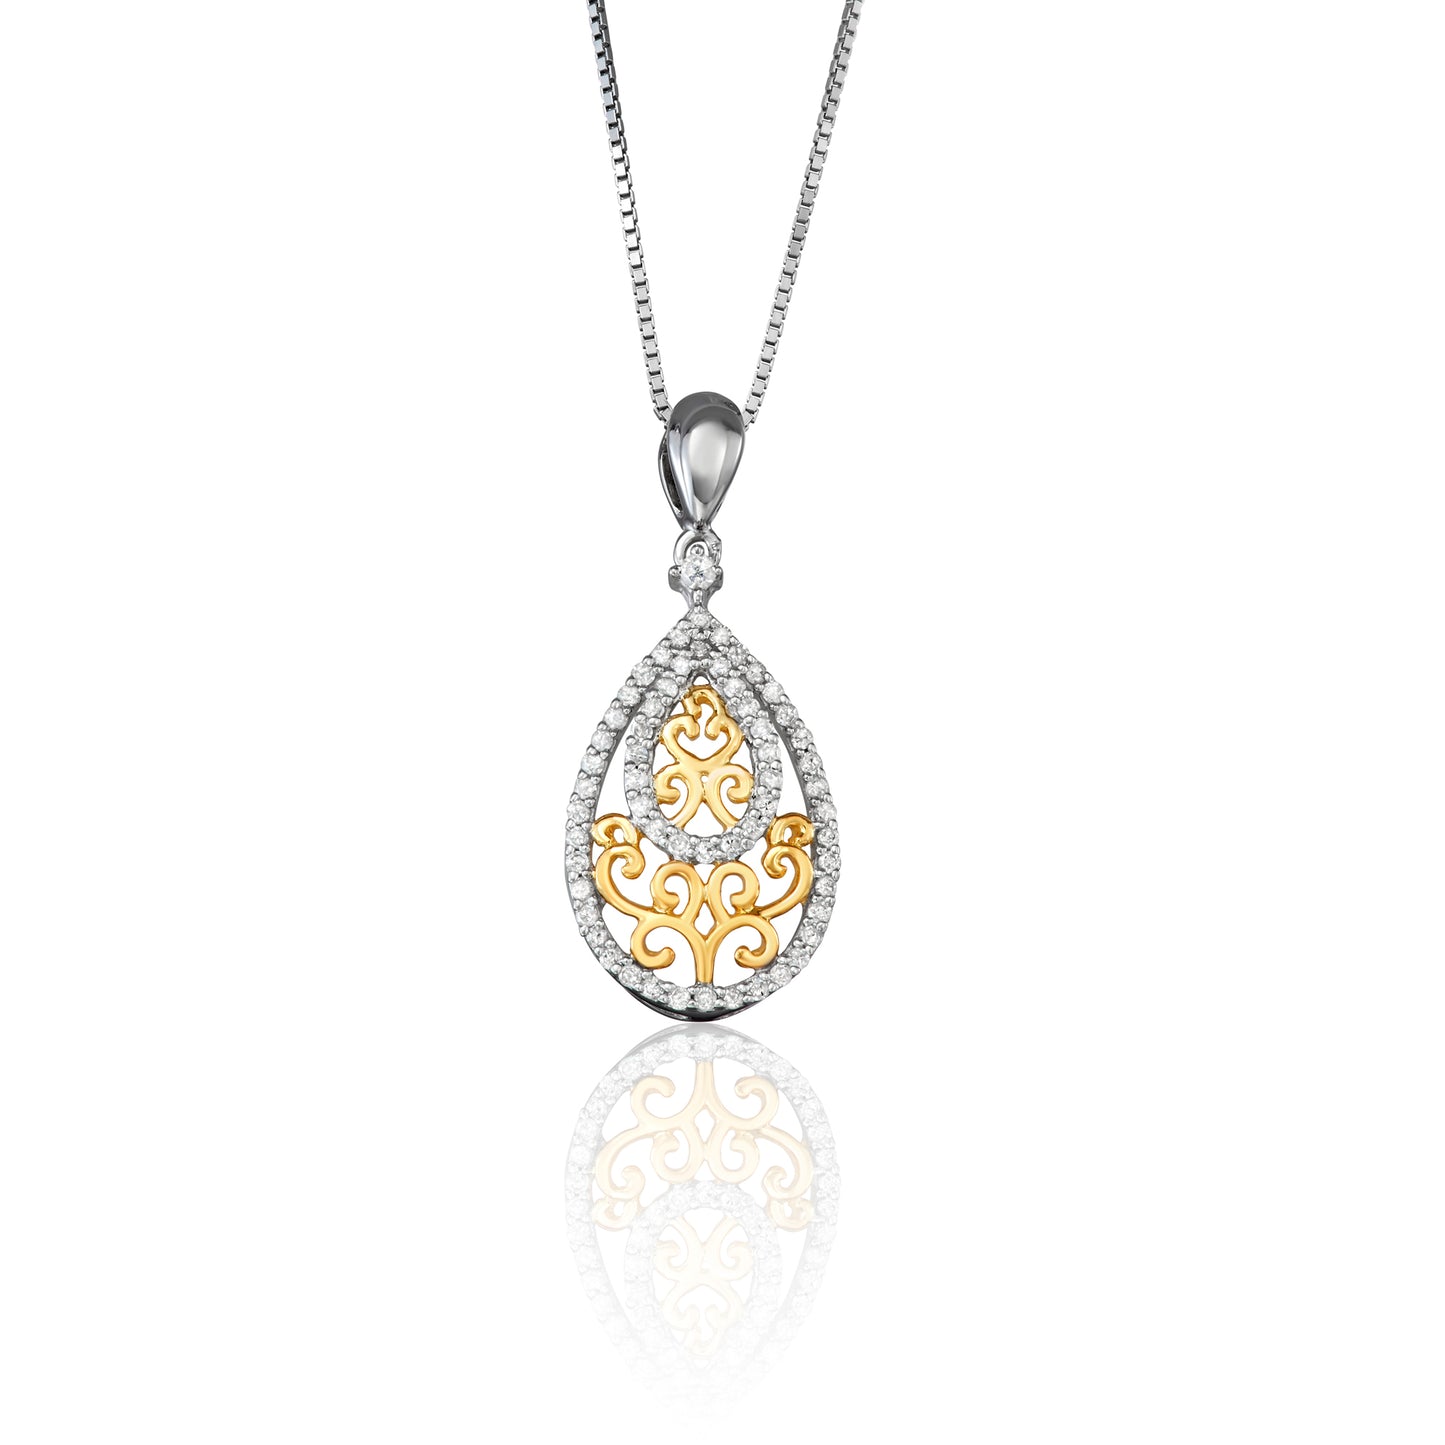 Two-Tone Sterling Silver 0.25 ct TDW White Diamond Tear-drop Necklace